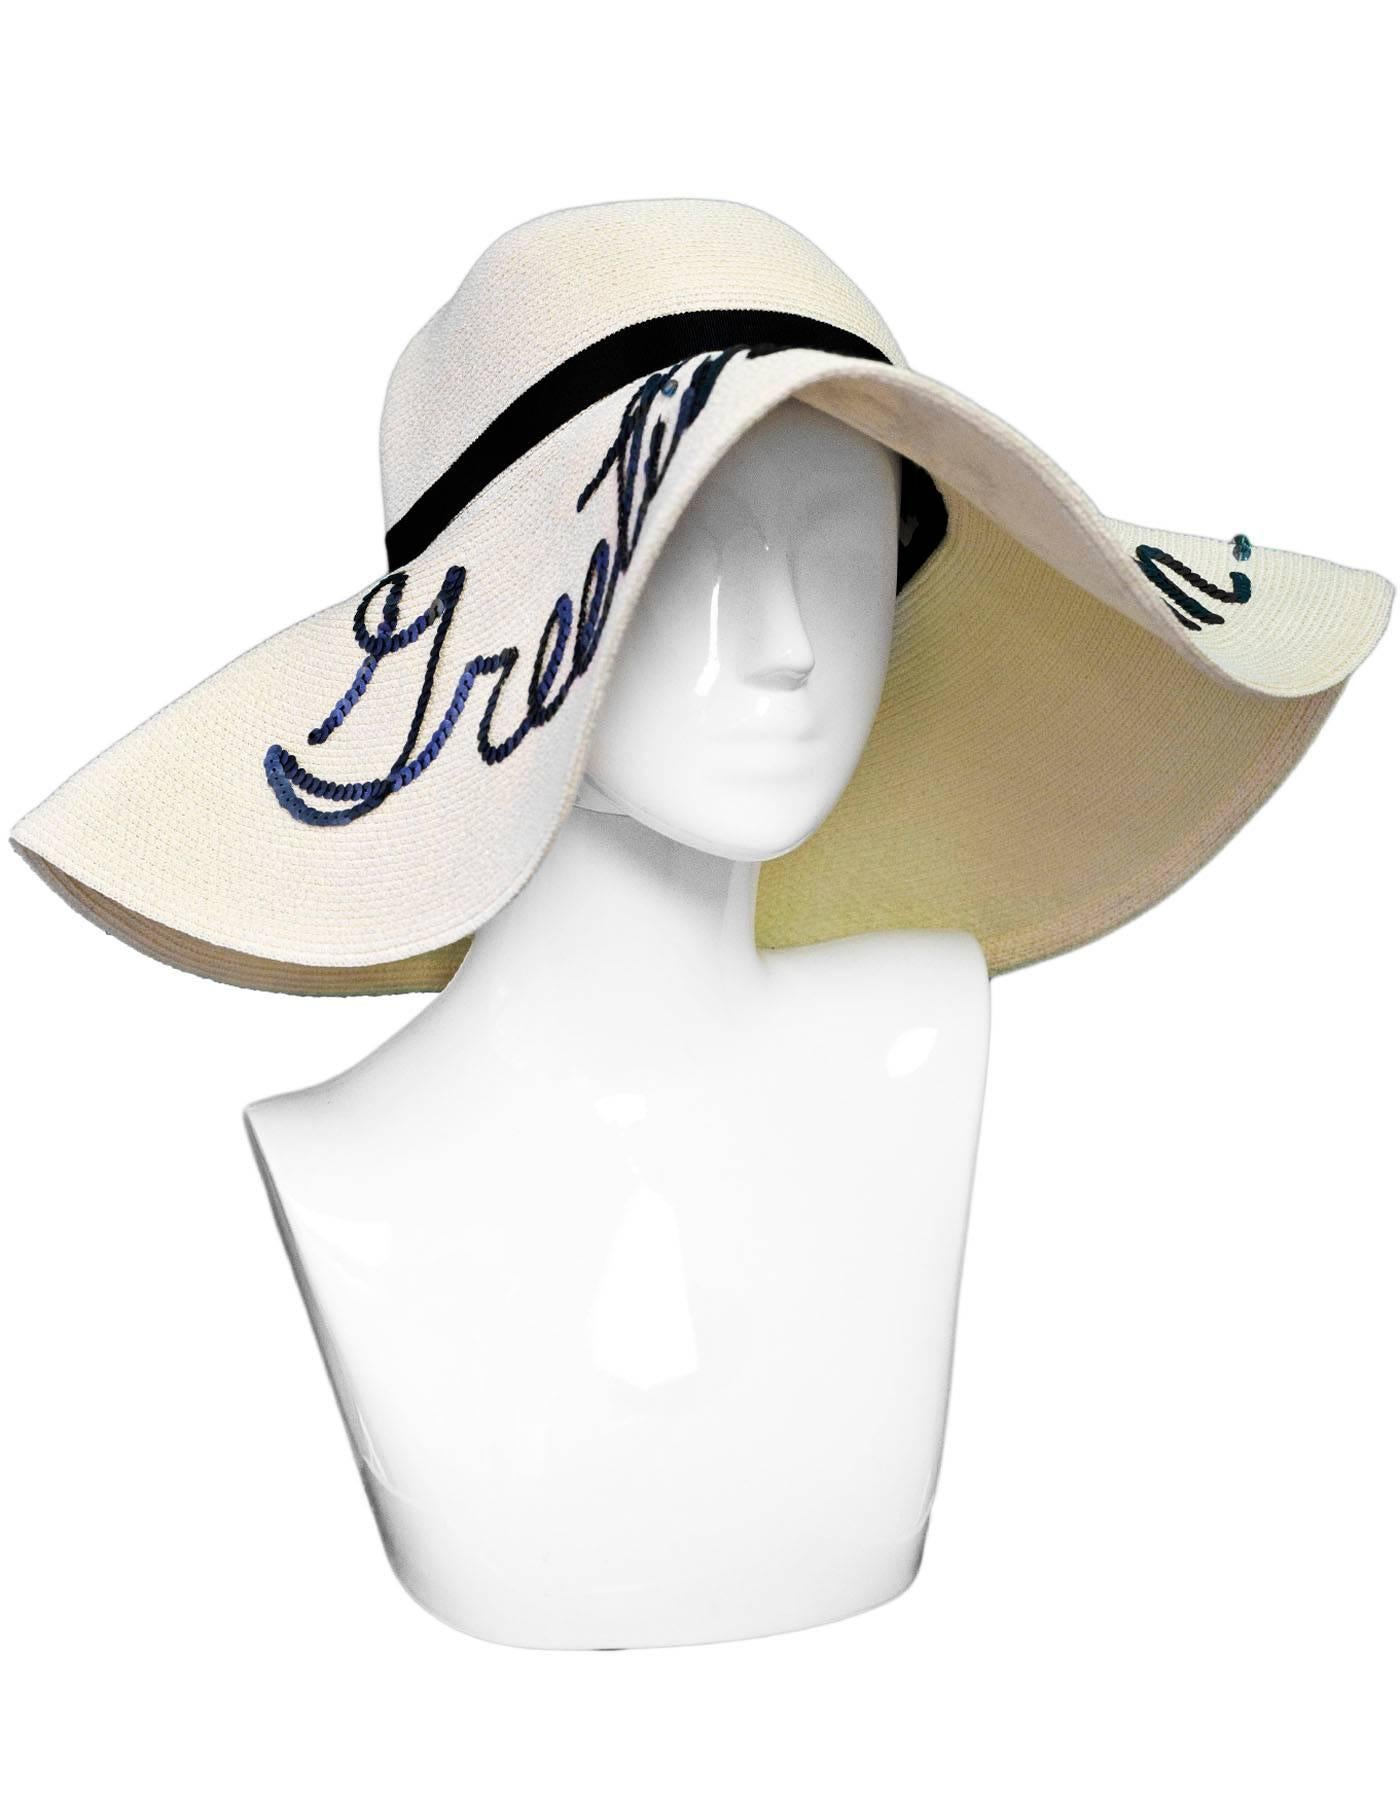 Eugenia Kim Cream Greetings From... Floppy Sun Hat
Features sequin detail

Made In: USA
Color: Cream
Materials: 57% Paper, 14% polypropylene, 29% polyester
Retail Price: $495 + tax
Overall Condition: Excellent pre-owned condition

Measurements: